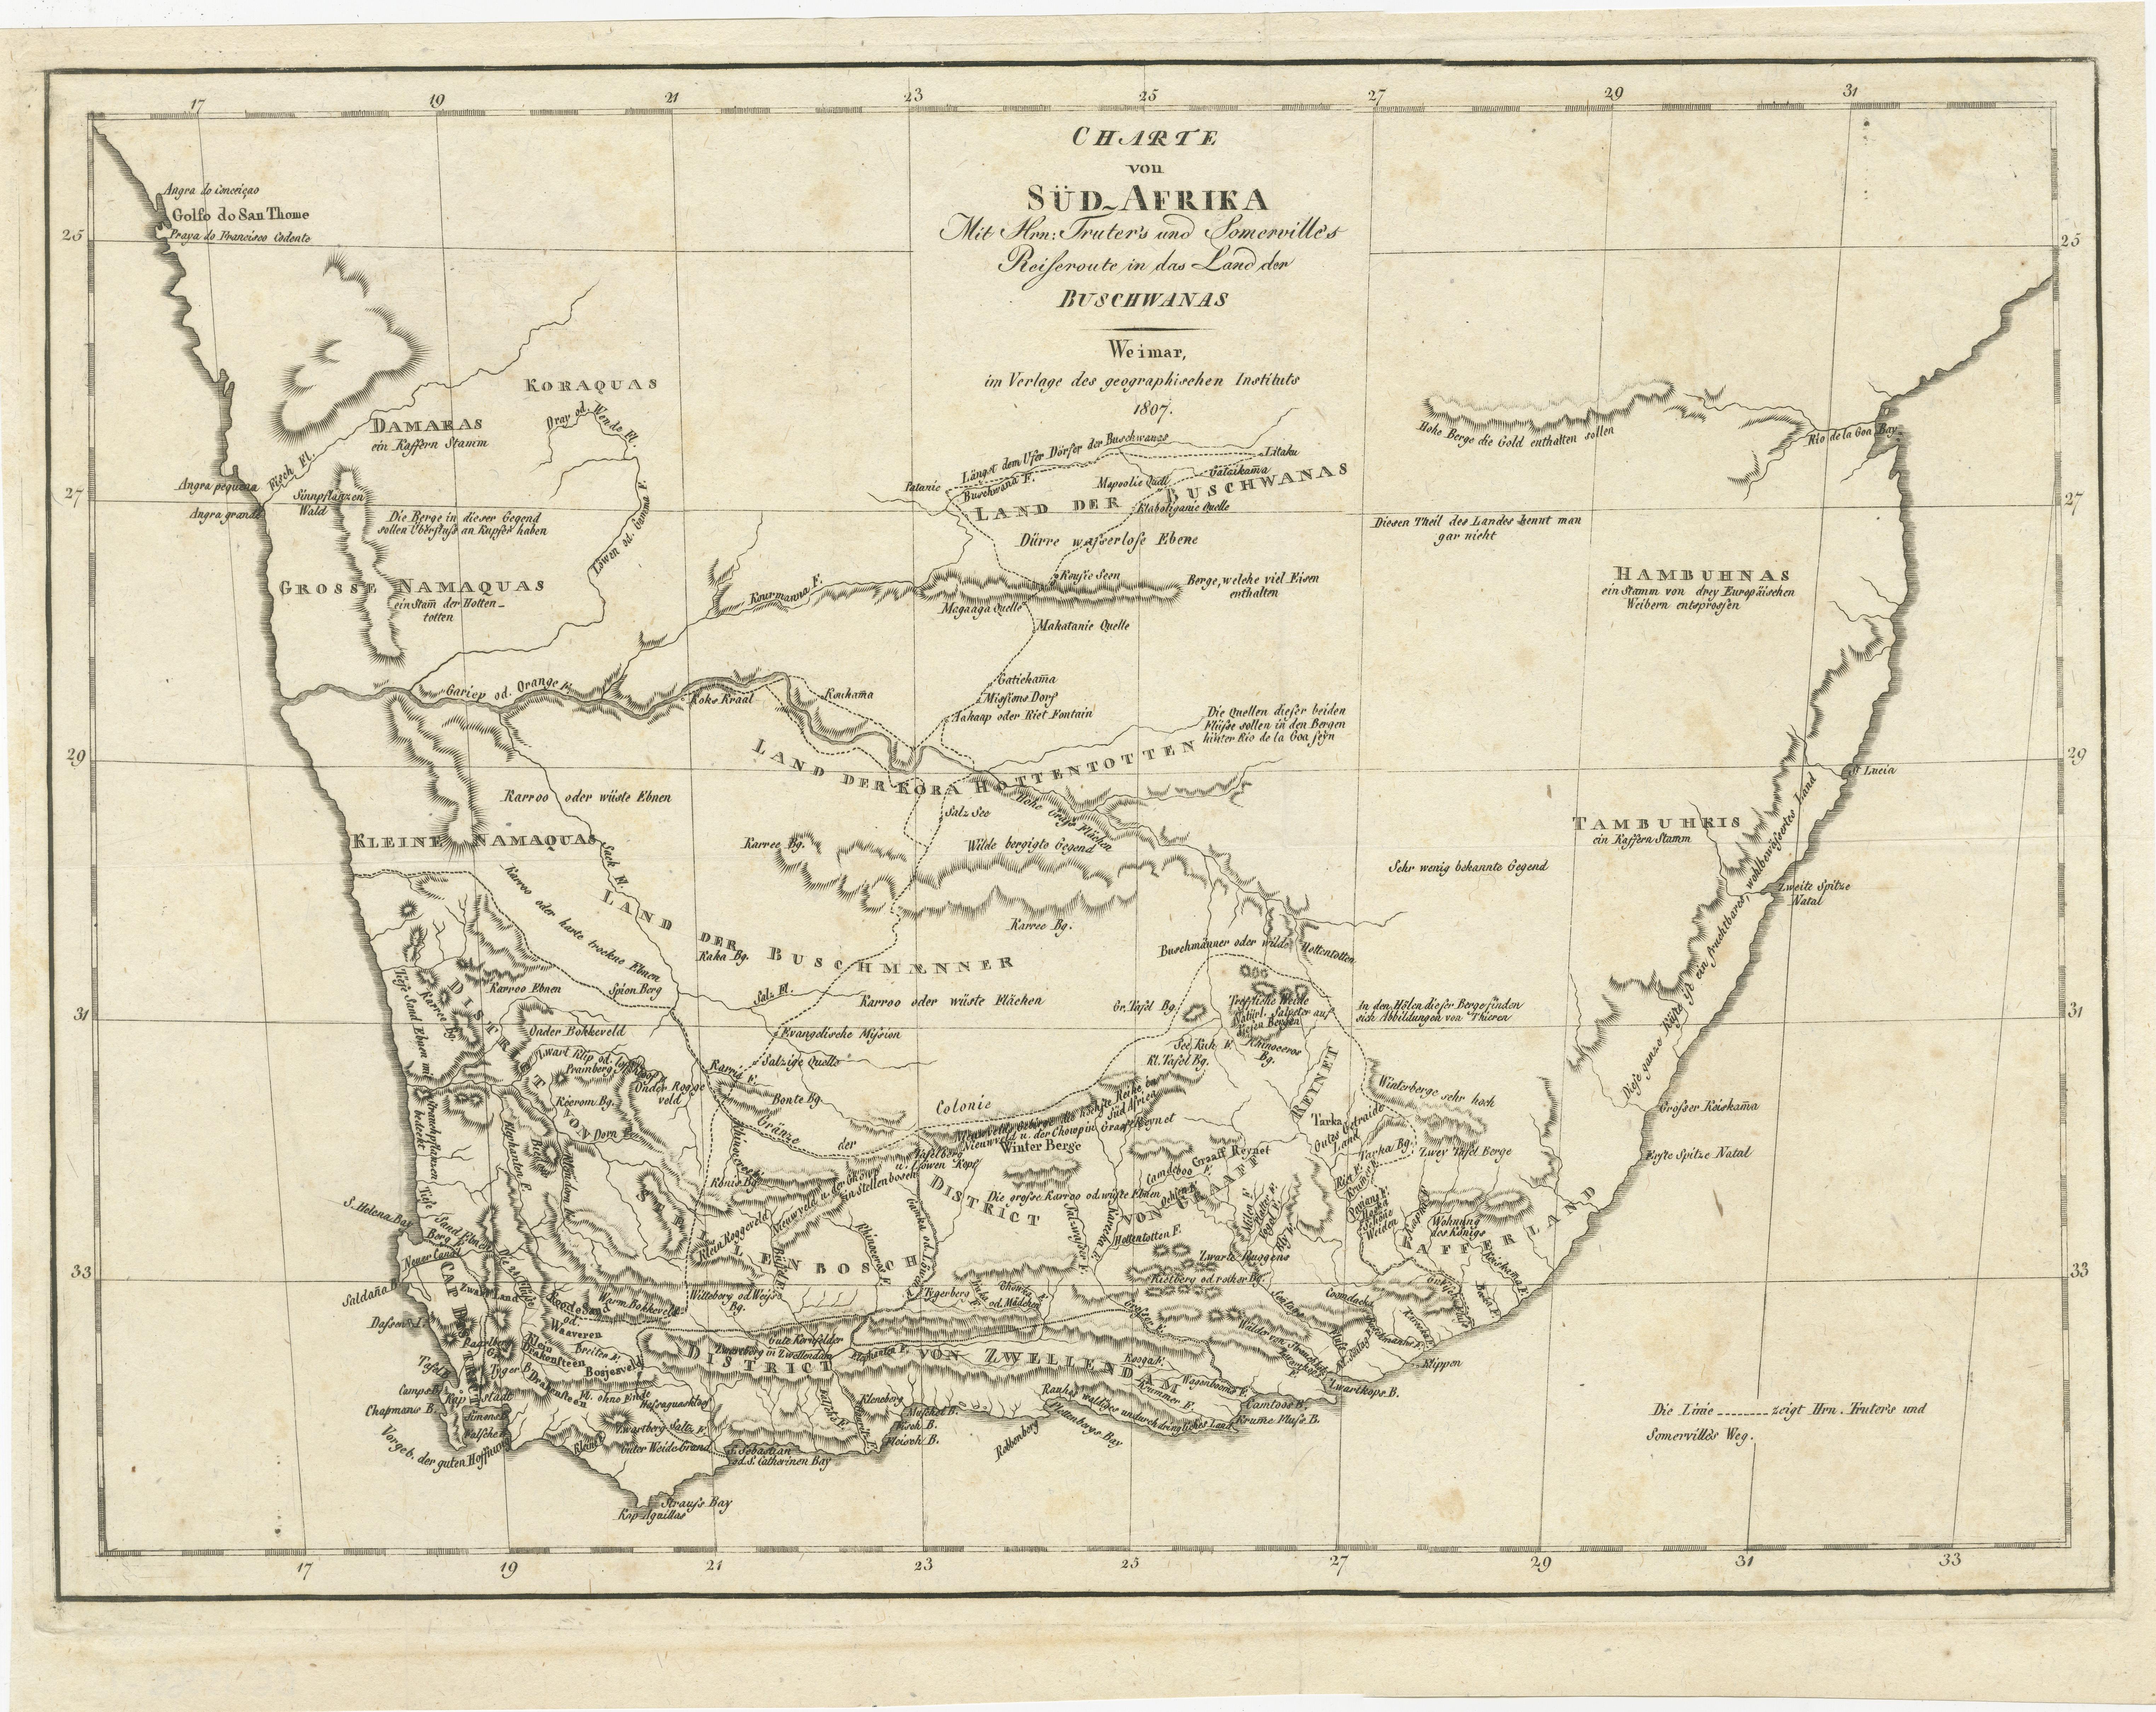 Antique map titled 'Charte von Süd-Afrika'. Original antique map of South Africa showing the travels of Truter and Somerville. Published circa 1807.